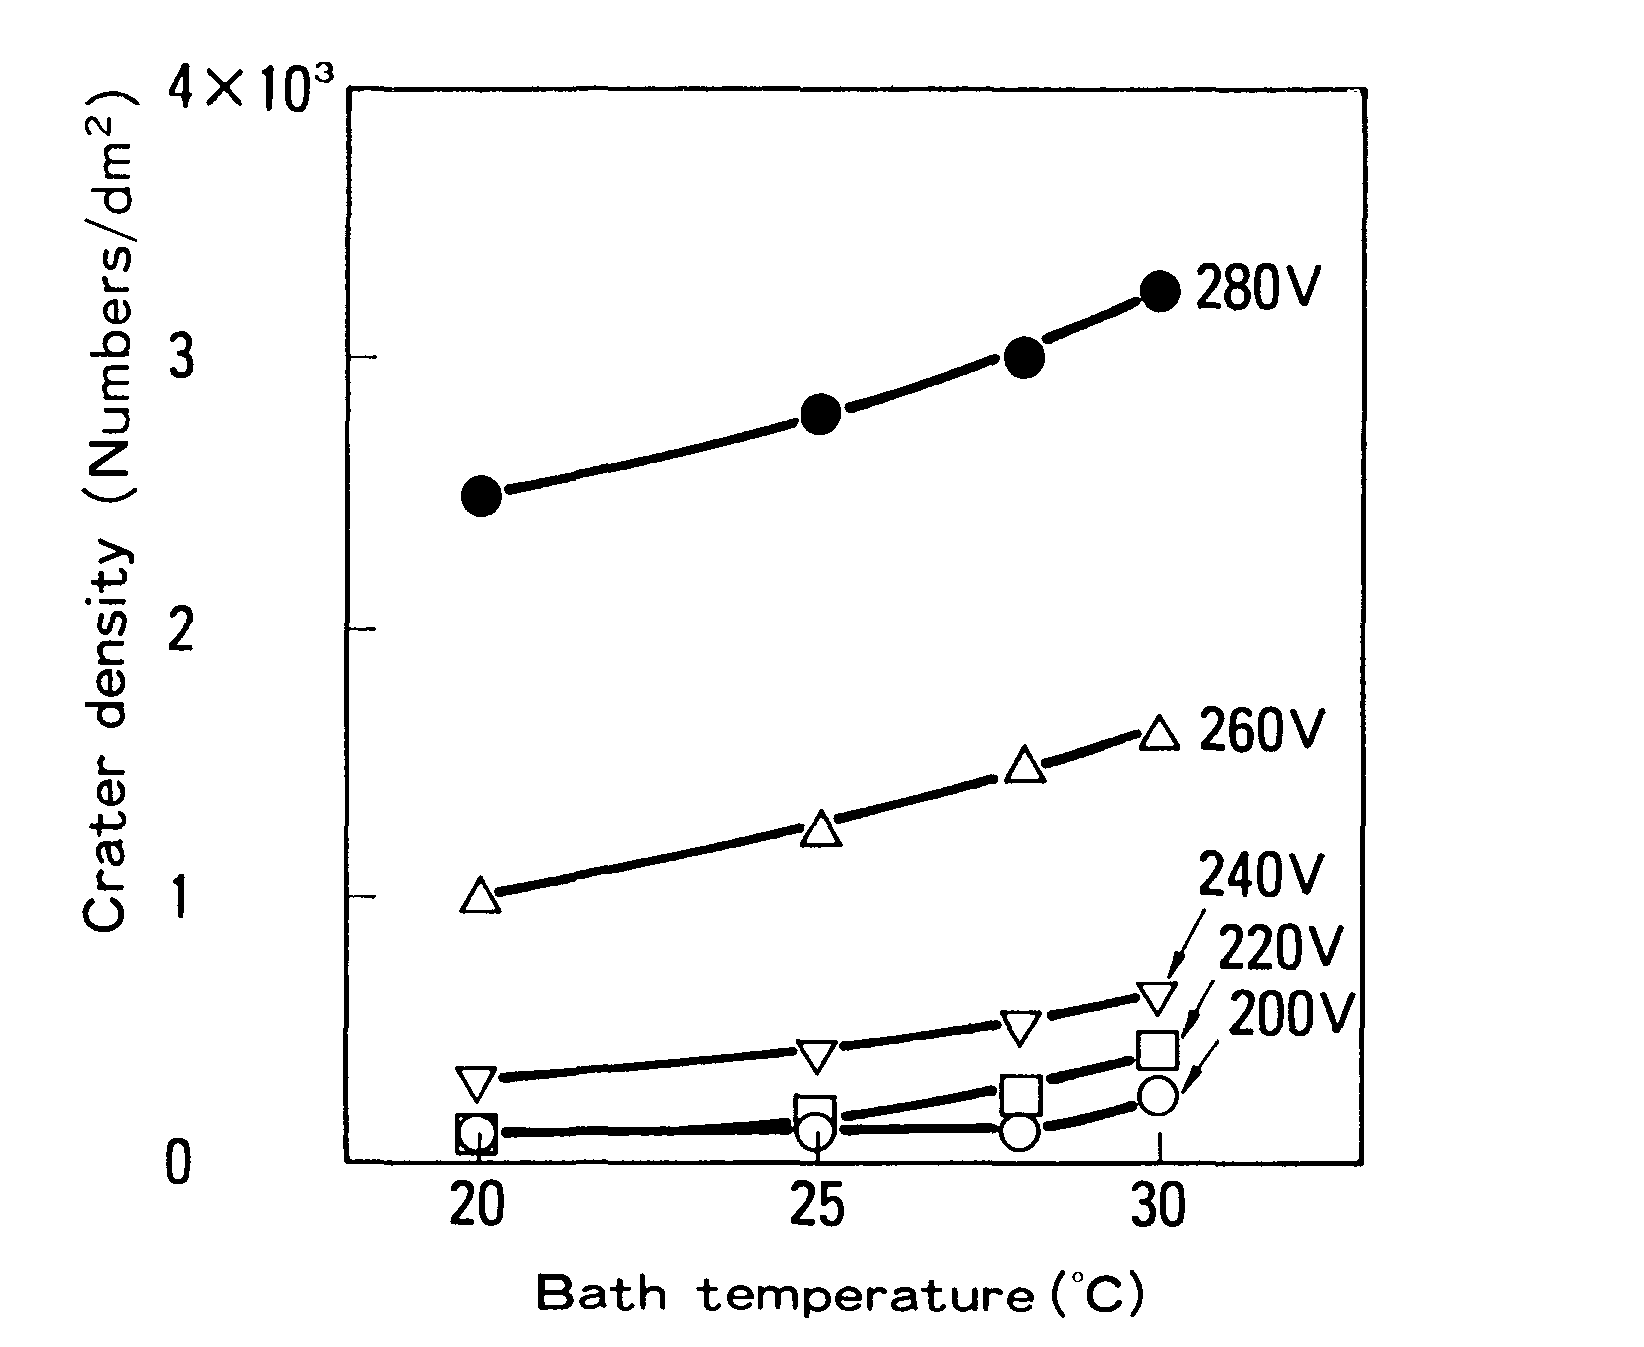 Relationship between bath temperature and crater density (zinc phosphated GA, epoxy GA, paint anode cathode distance 15 cm).